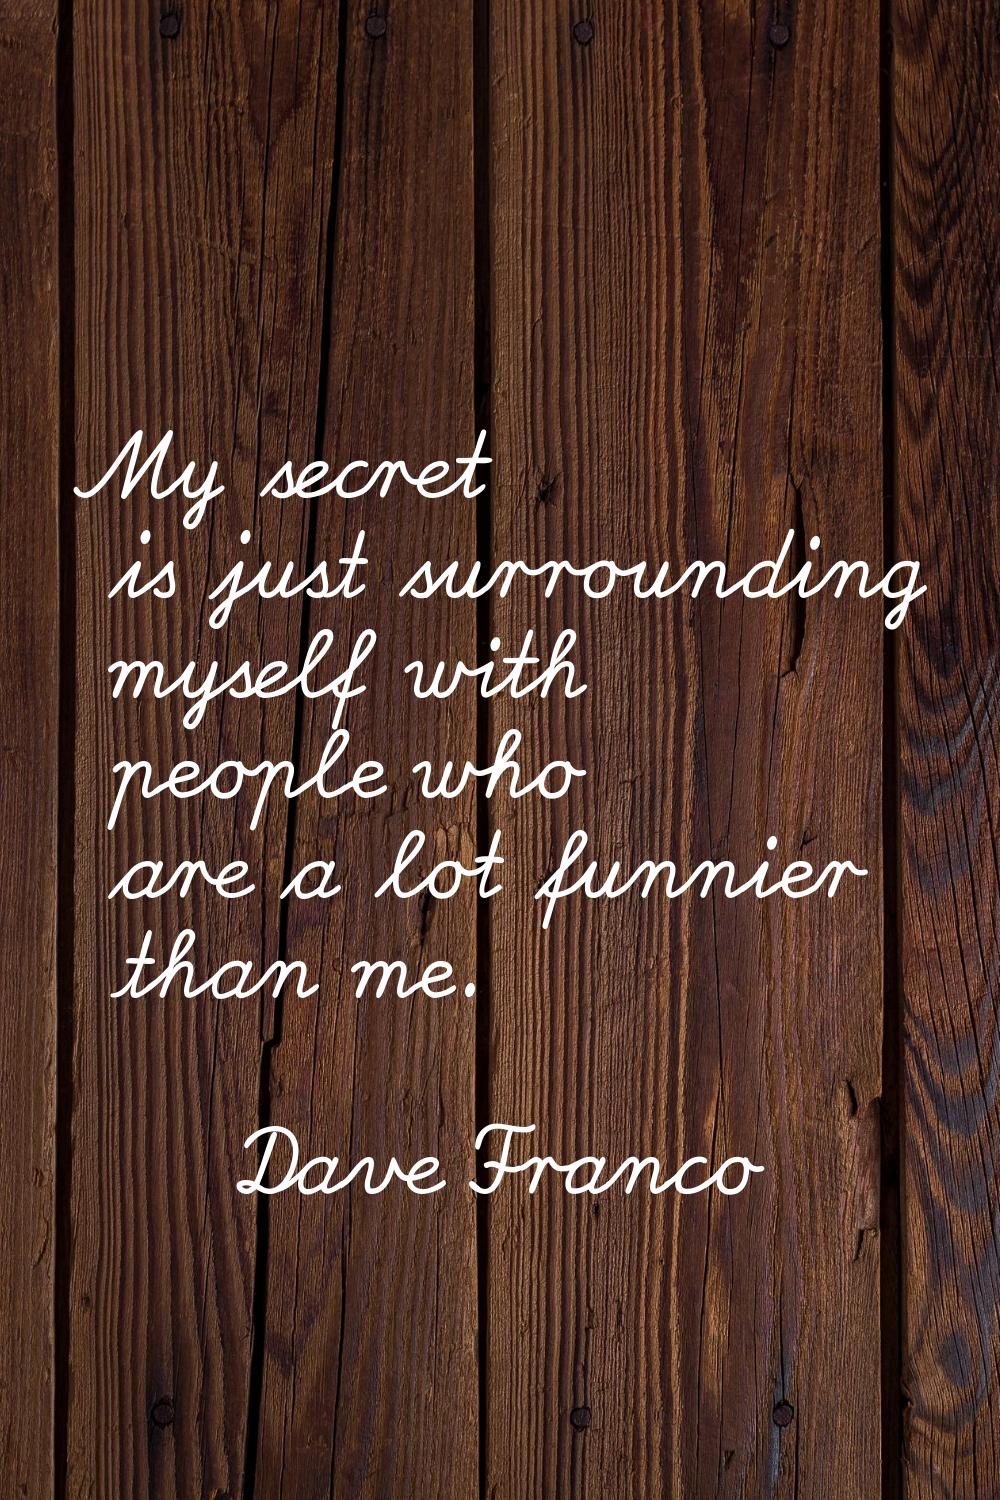 My secret is just surrounding myself with people who are a lot funnier than me.